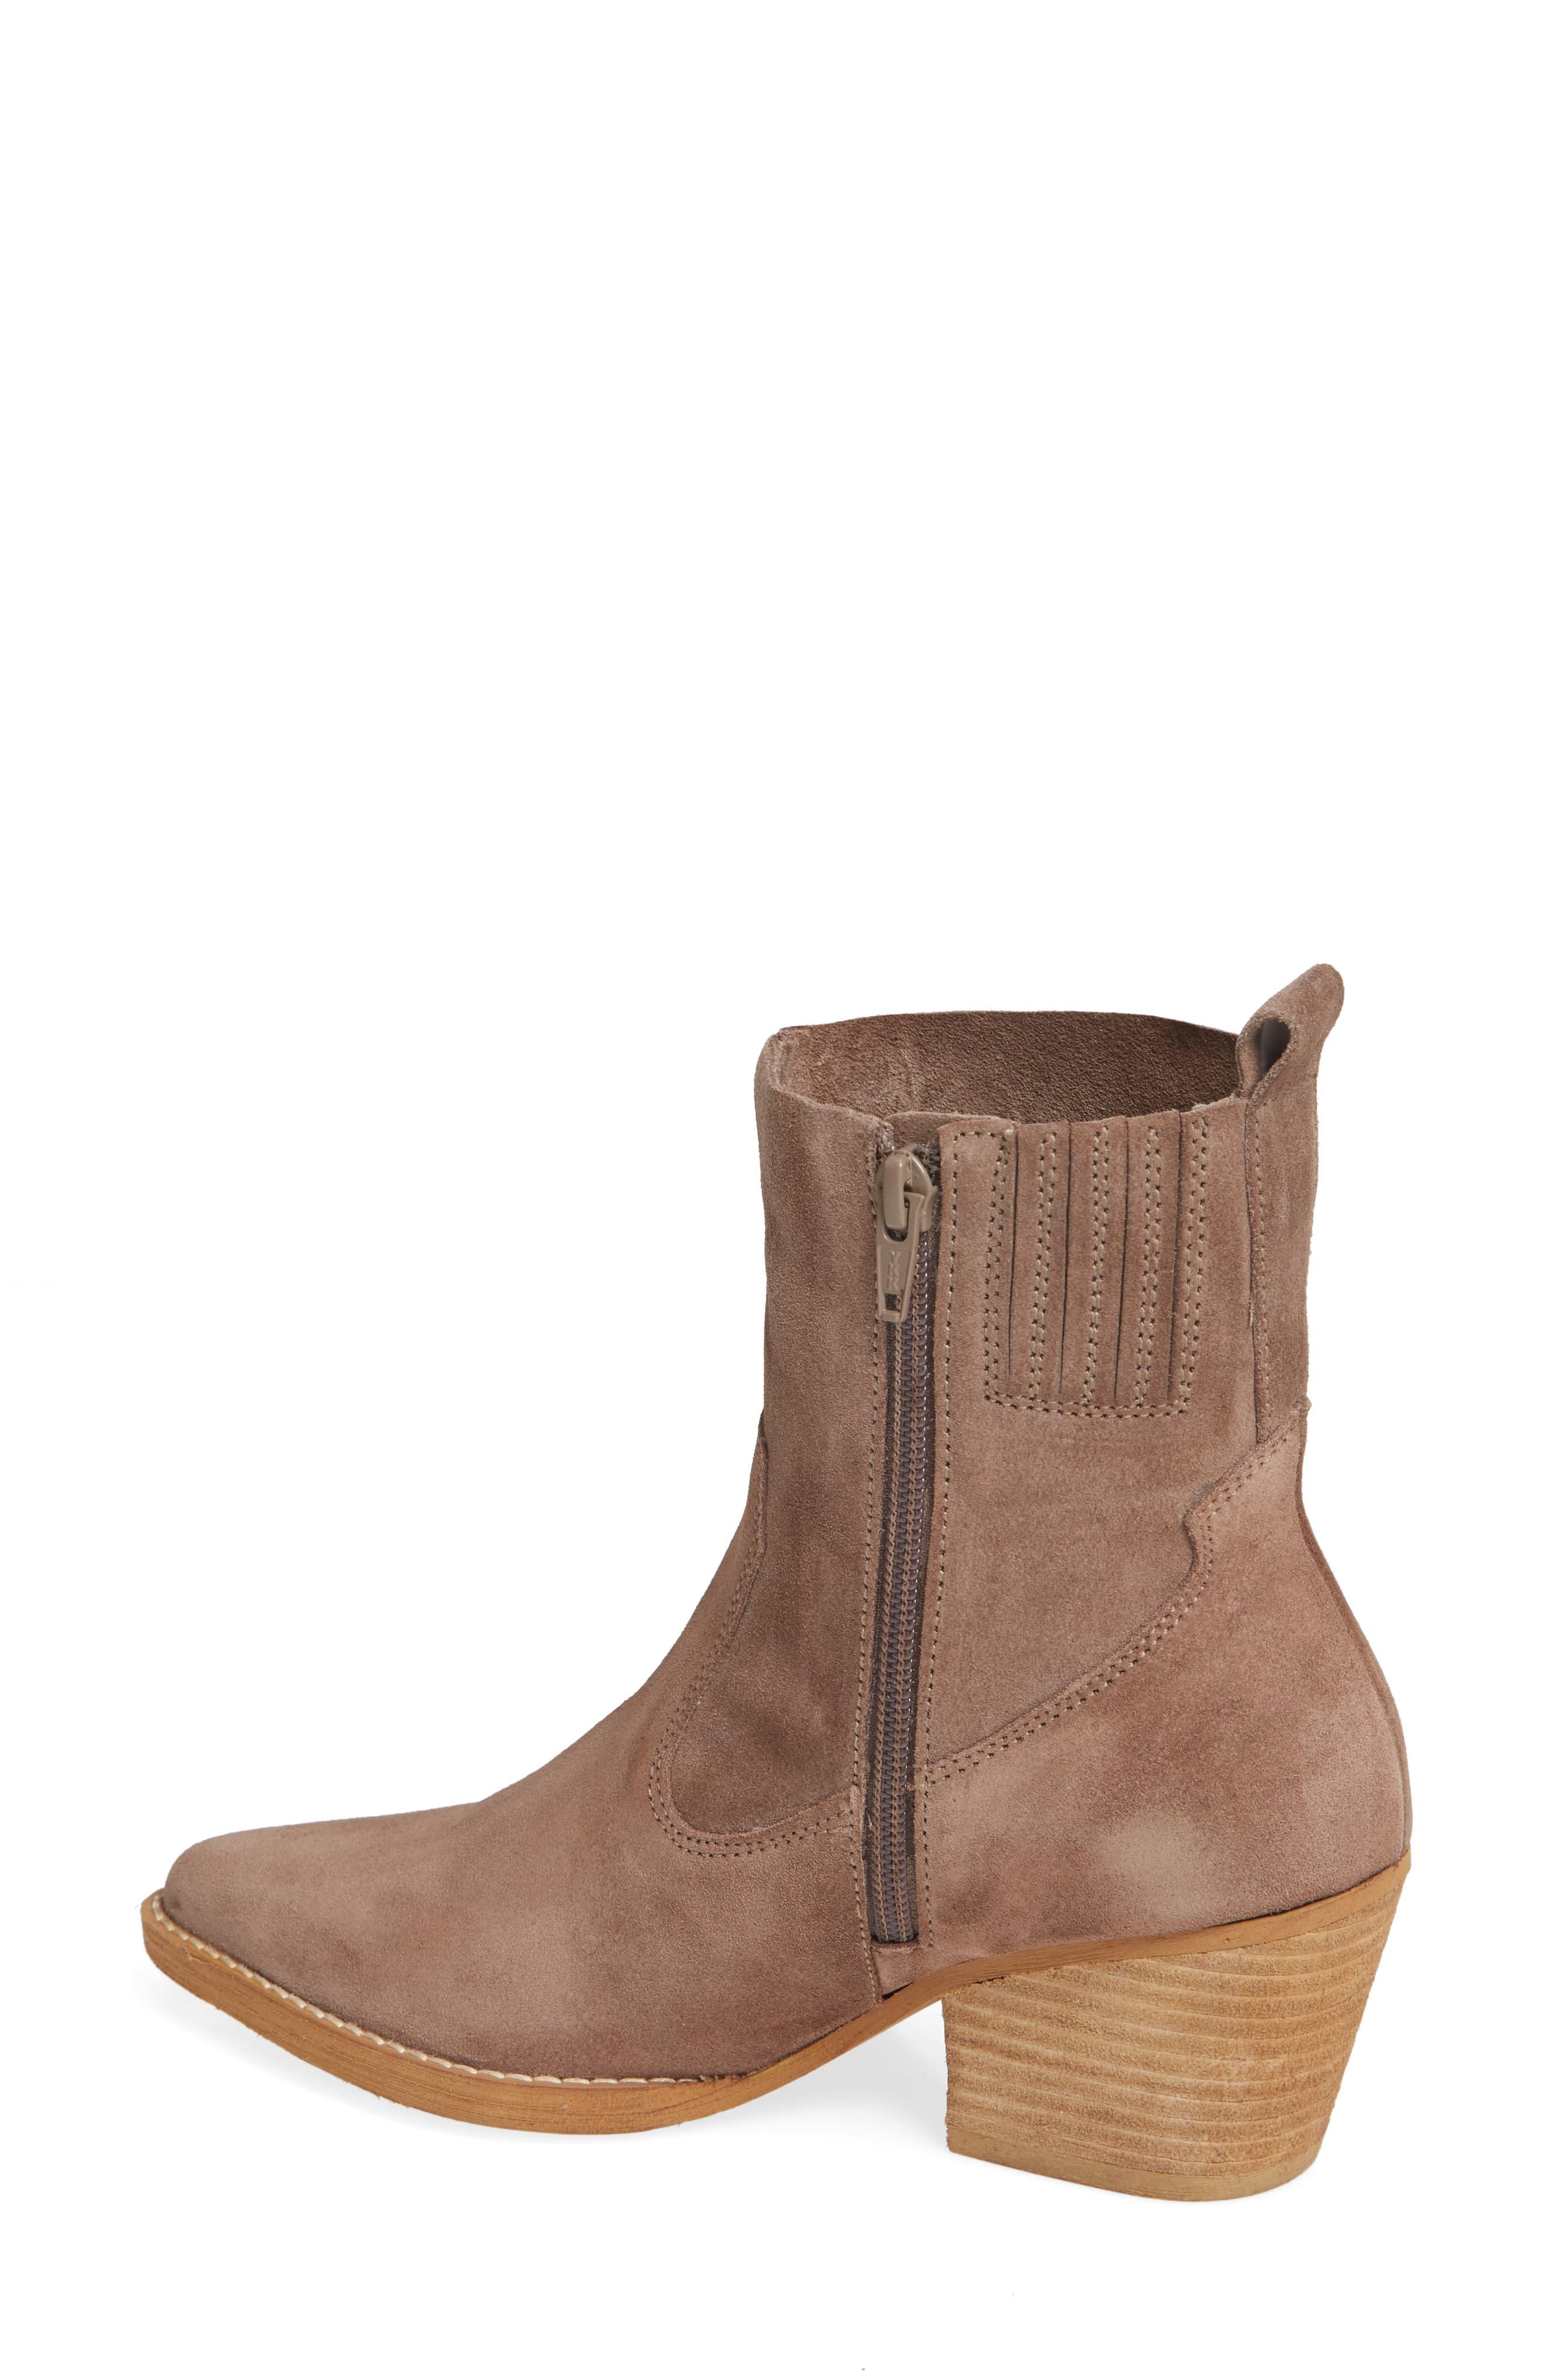 Jeffrey Campbell Kelam Bootie in Taupe 